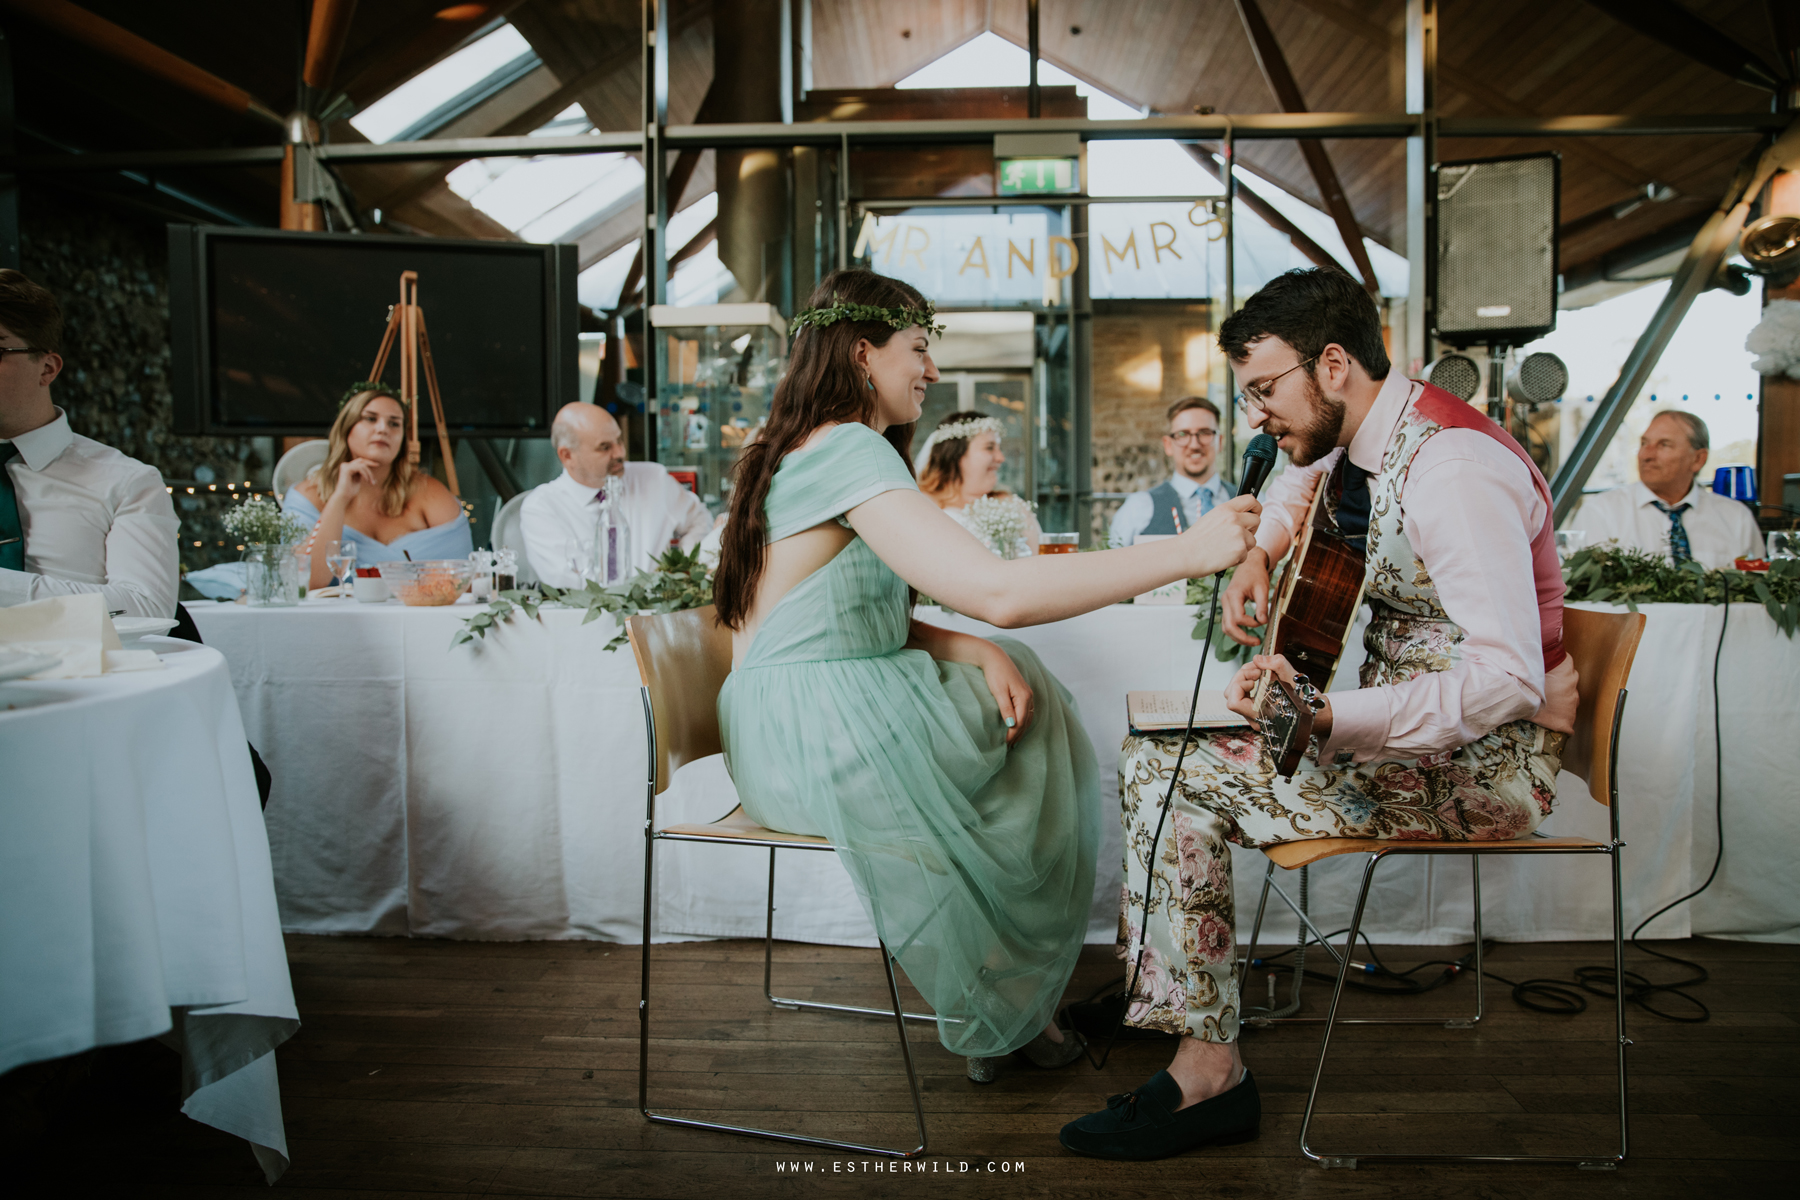 Norwich_Castle_Arcade_Grosvenor_Chip_Birdcage_Cathedral_Cloisters_Refectory_Wedding_Photography_Esther_Wild_Photographer_Norfolk_Kings_Lynn_3R8A2284.jpg